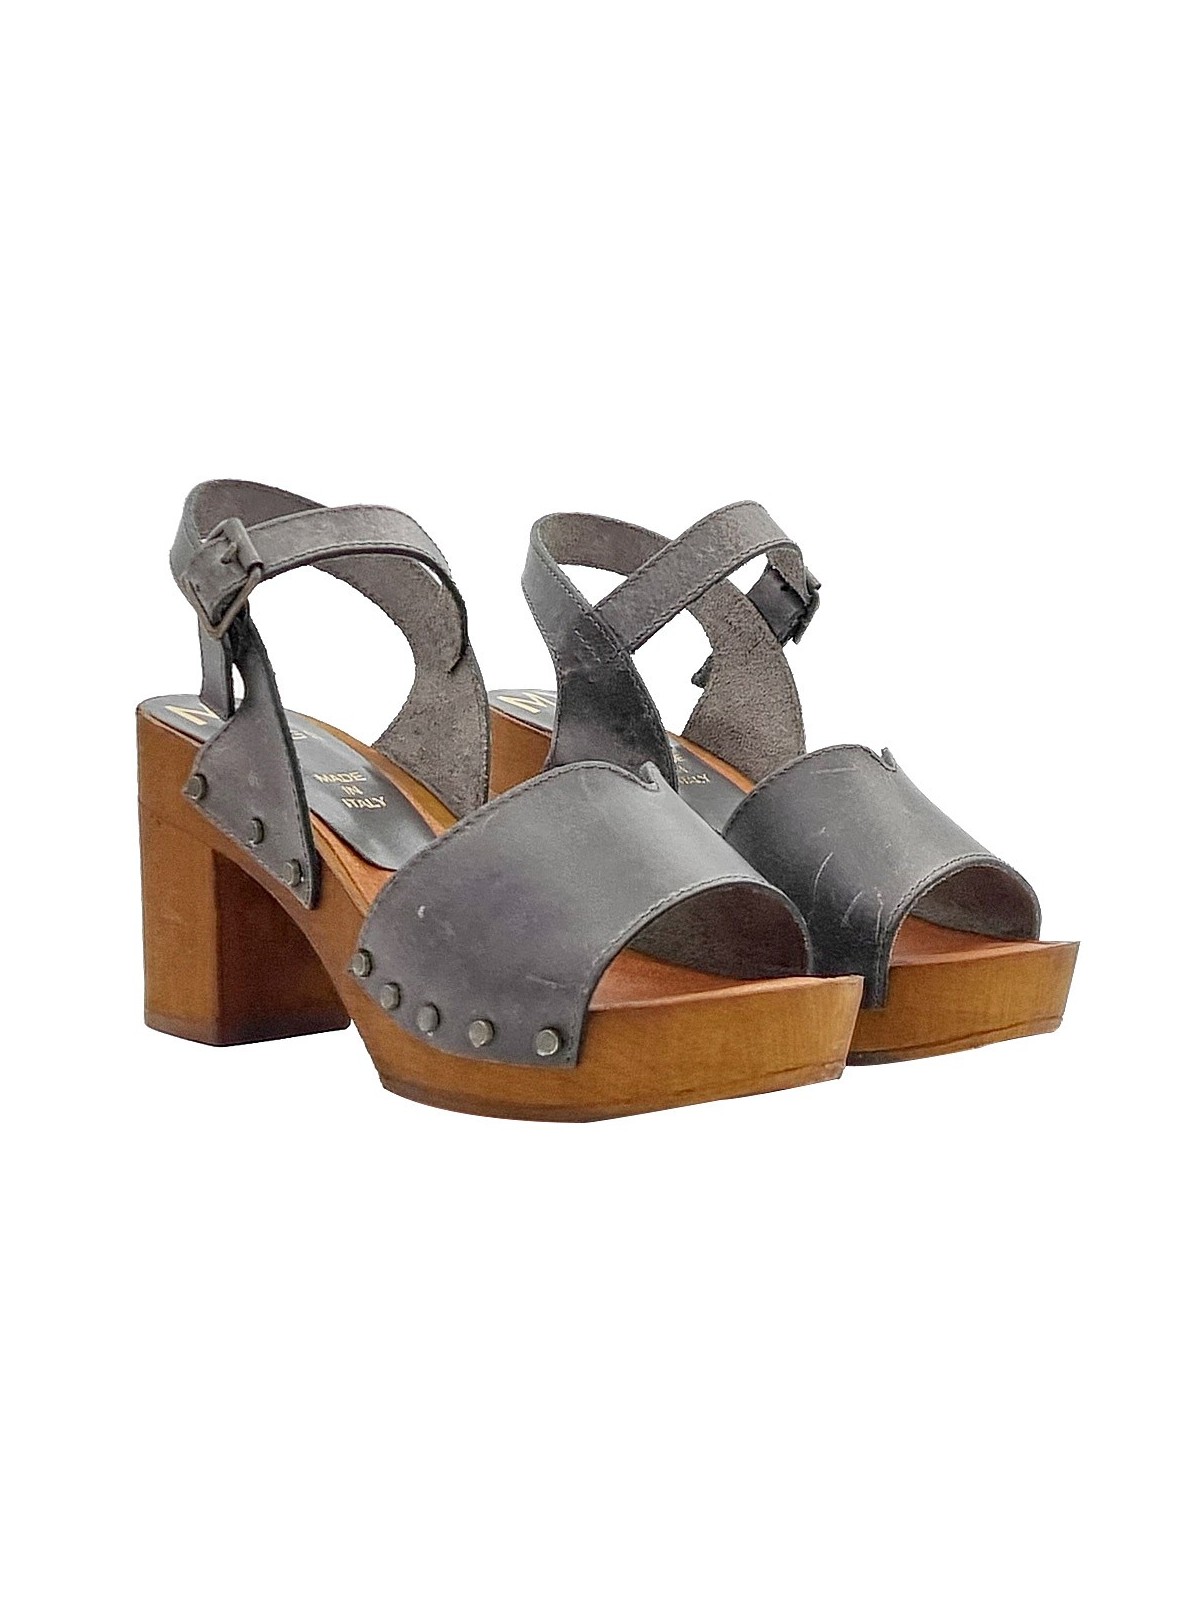 SMOKE GRAY SANDALS WITH STRAP AND 8.5 HEEL